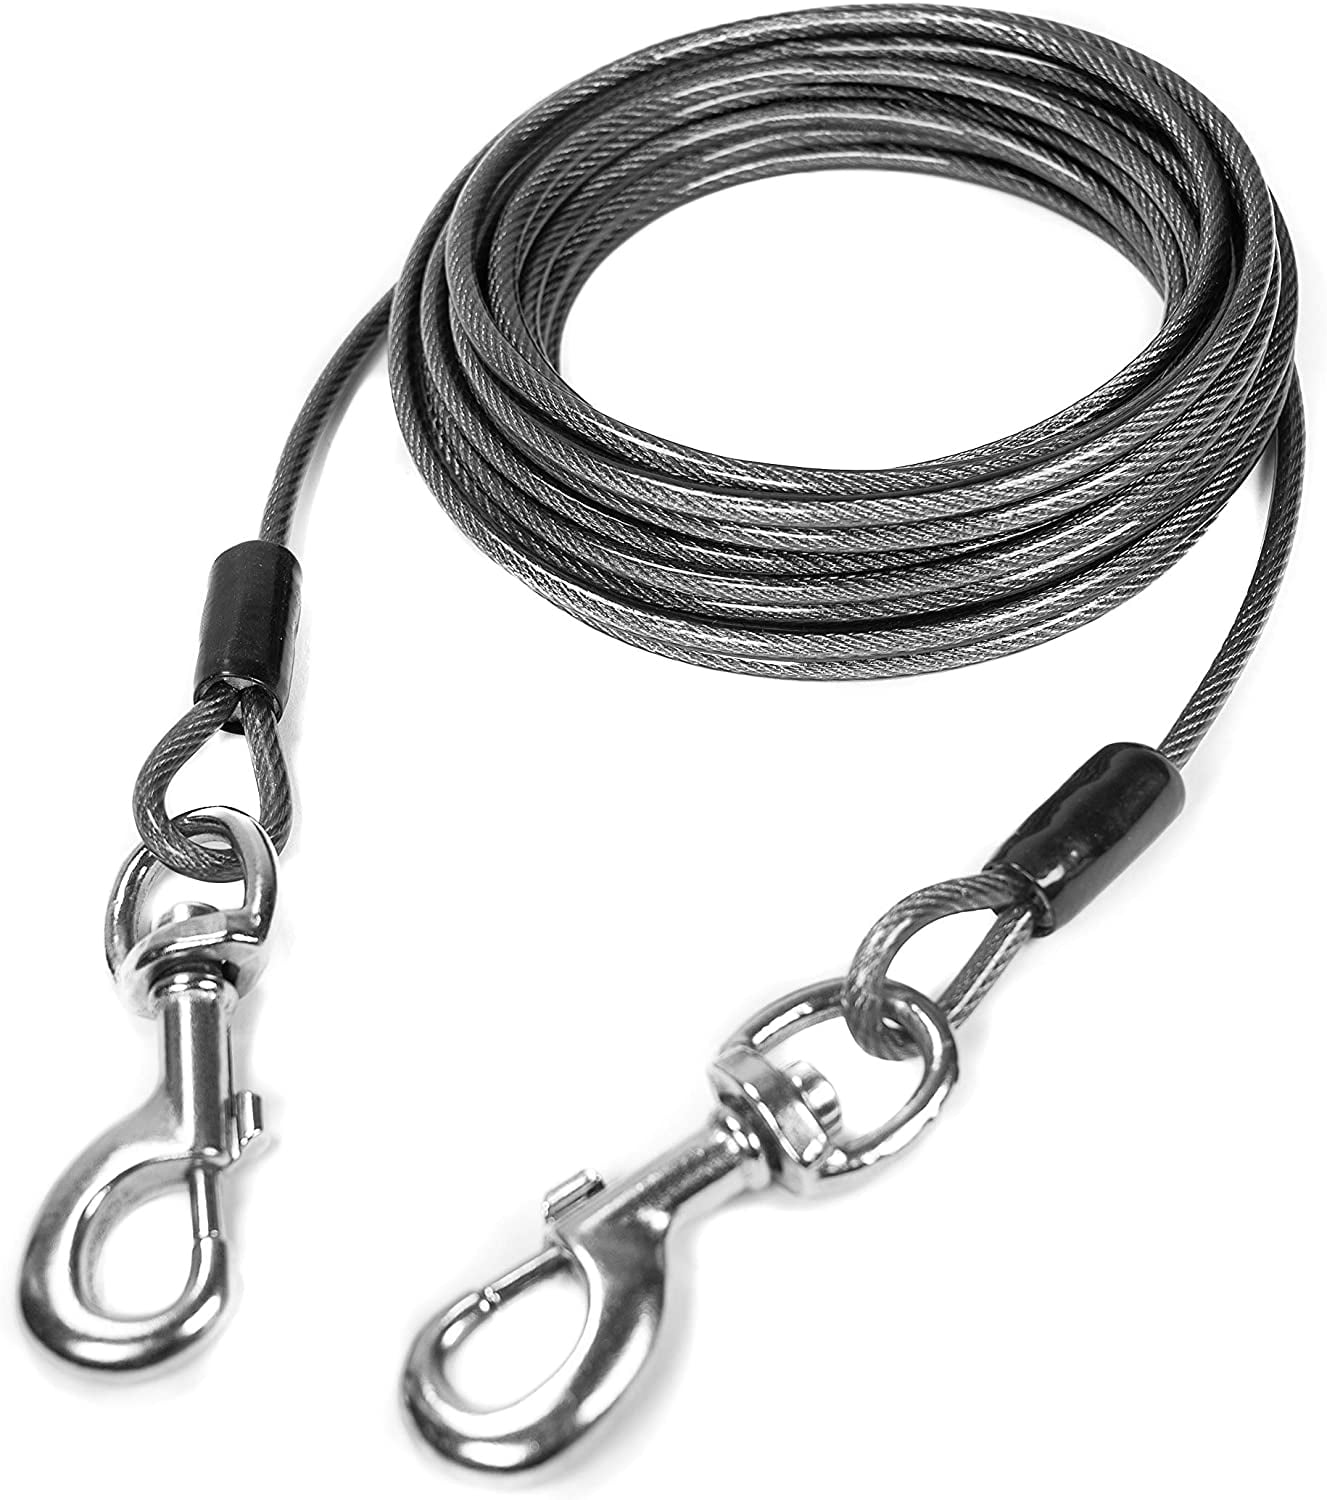 Quality Dog Out Cable Heavy Duty Strong Steel Rush Proof Pet Tie Leash 15 Ft US 